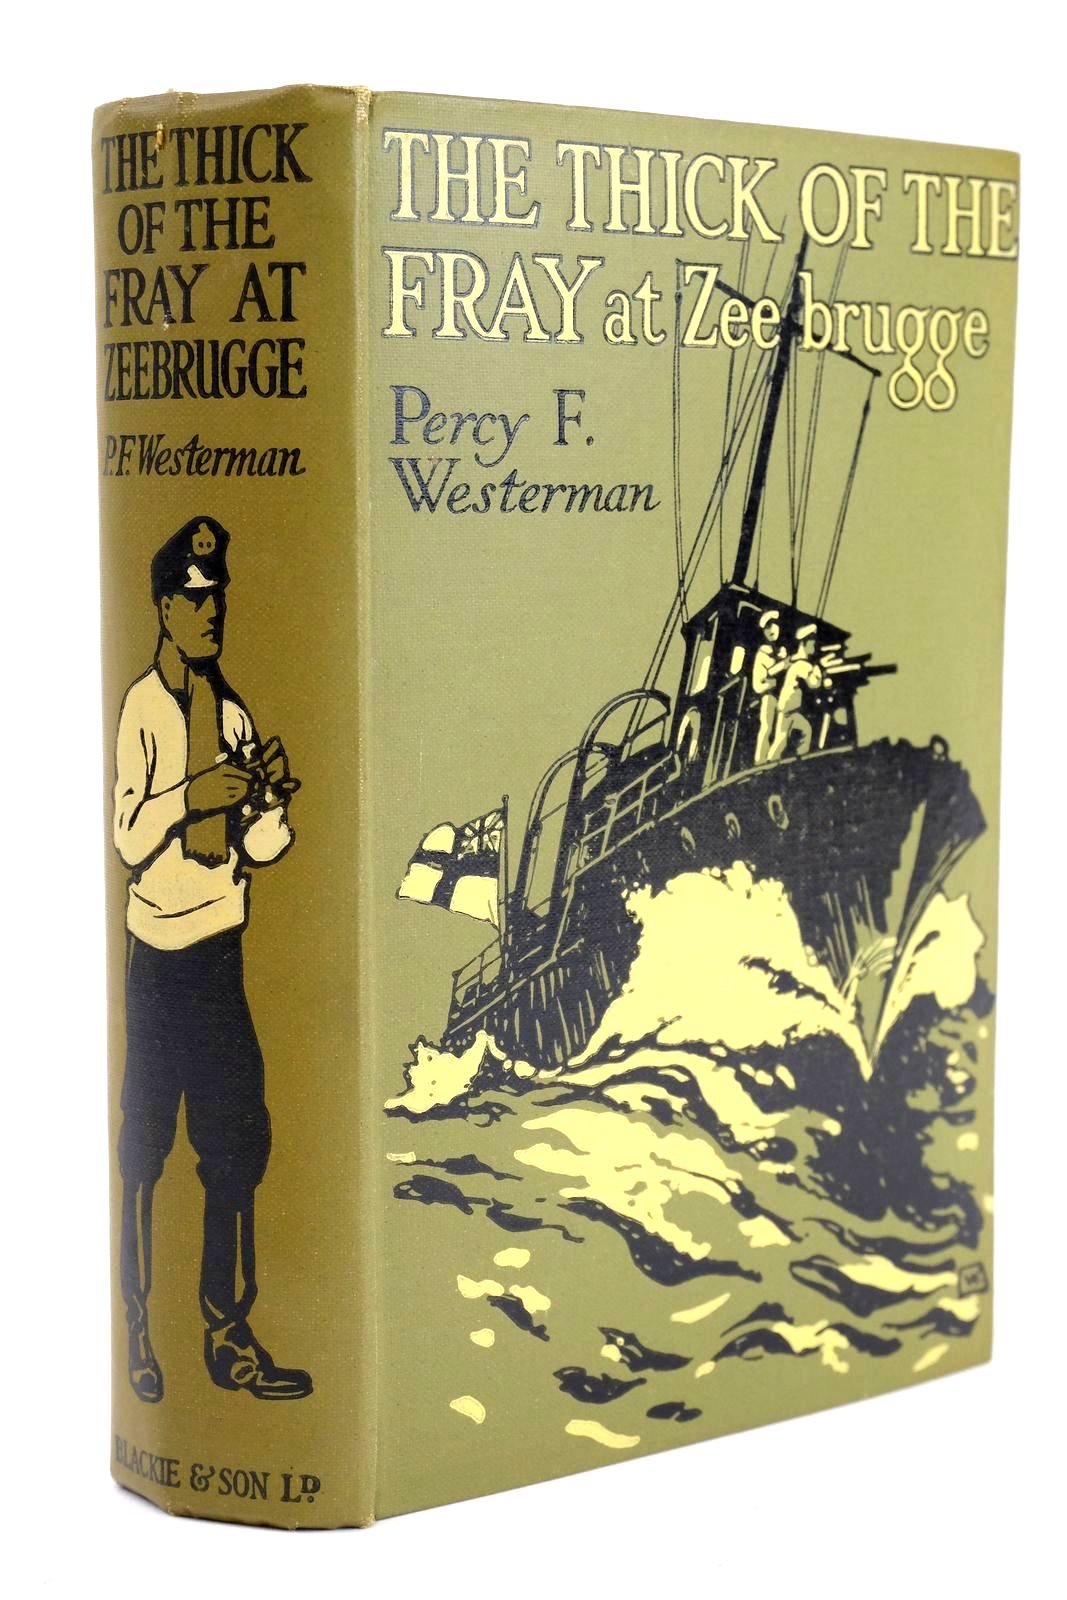 Photo of THE THICK OF THE FRAY AT ZEEBRUGGE APRIL 1918 written by Westerman, Percy F. illustrated by Wigfull, W. Edward published by Blackie & Son Ltd. (STOCK CODE: 1324471)  for sale by Stella & Rose's Books